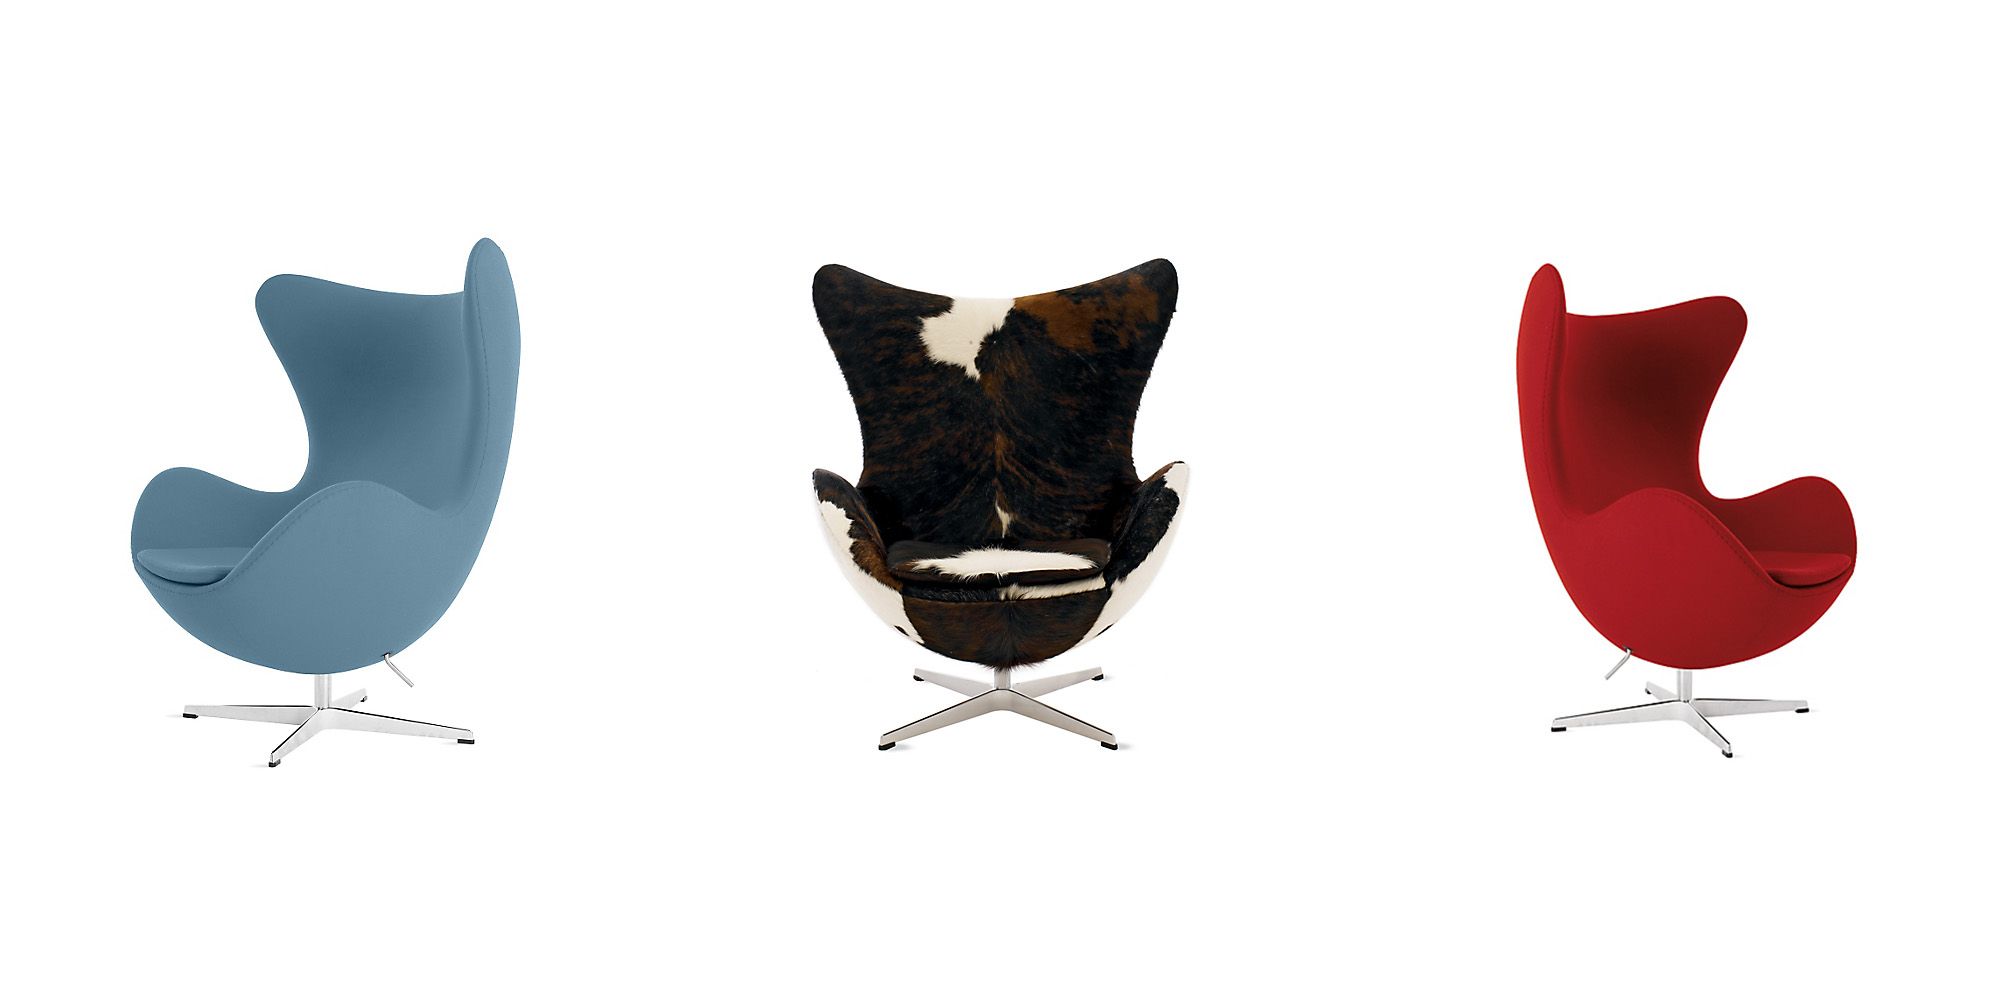 The Of The Iconic Egg Chair - Arne Egg Chair